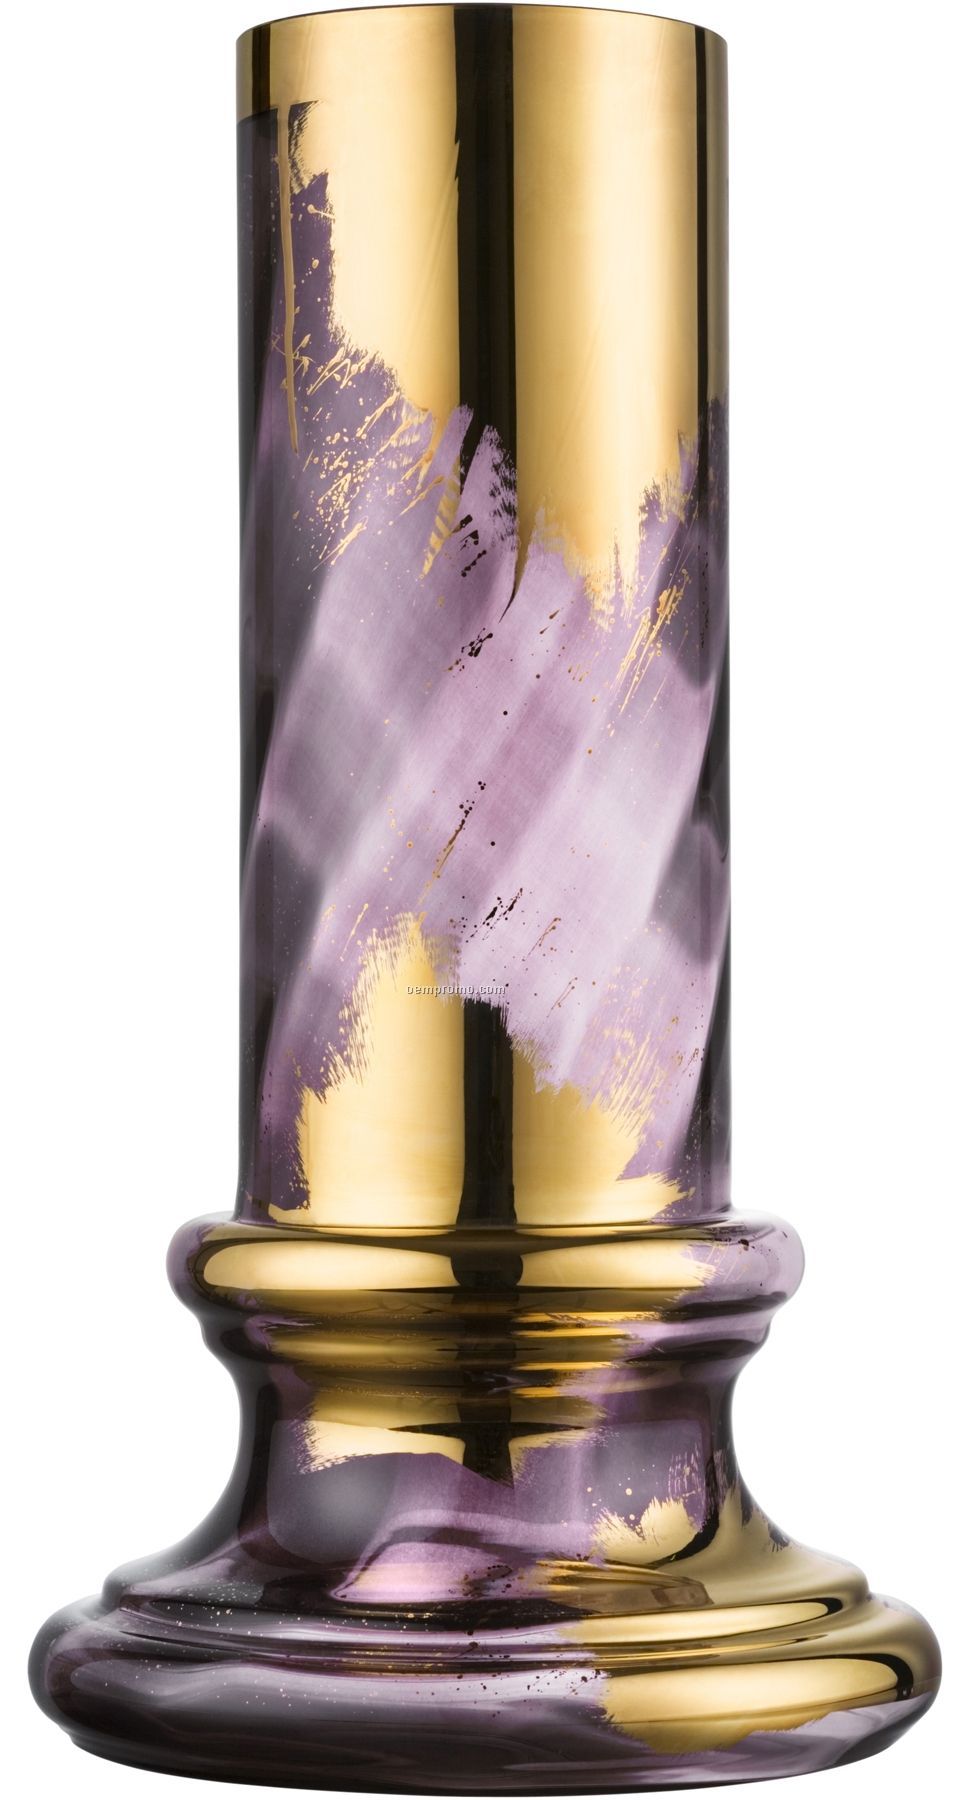 Jackie Tall Hand Painted Glass Vase By Asa Jungnelius (Aubergine)